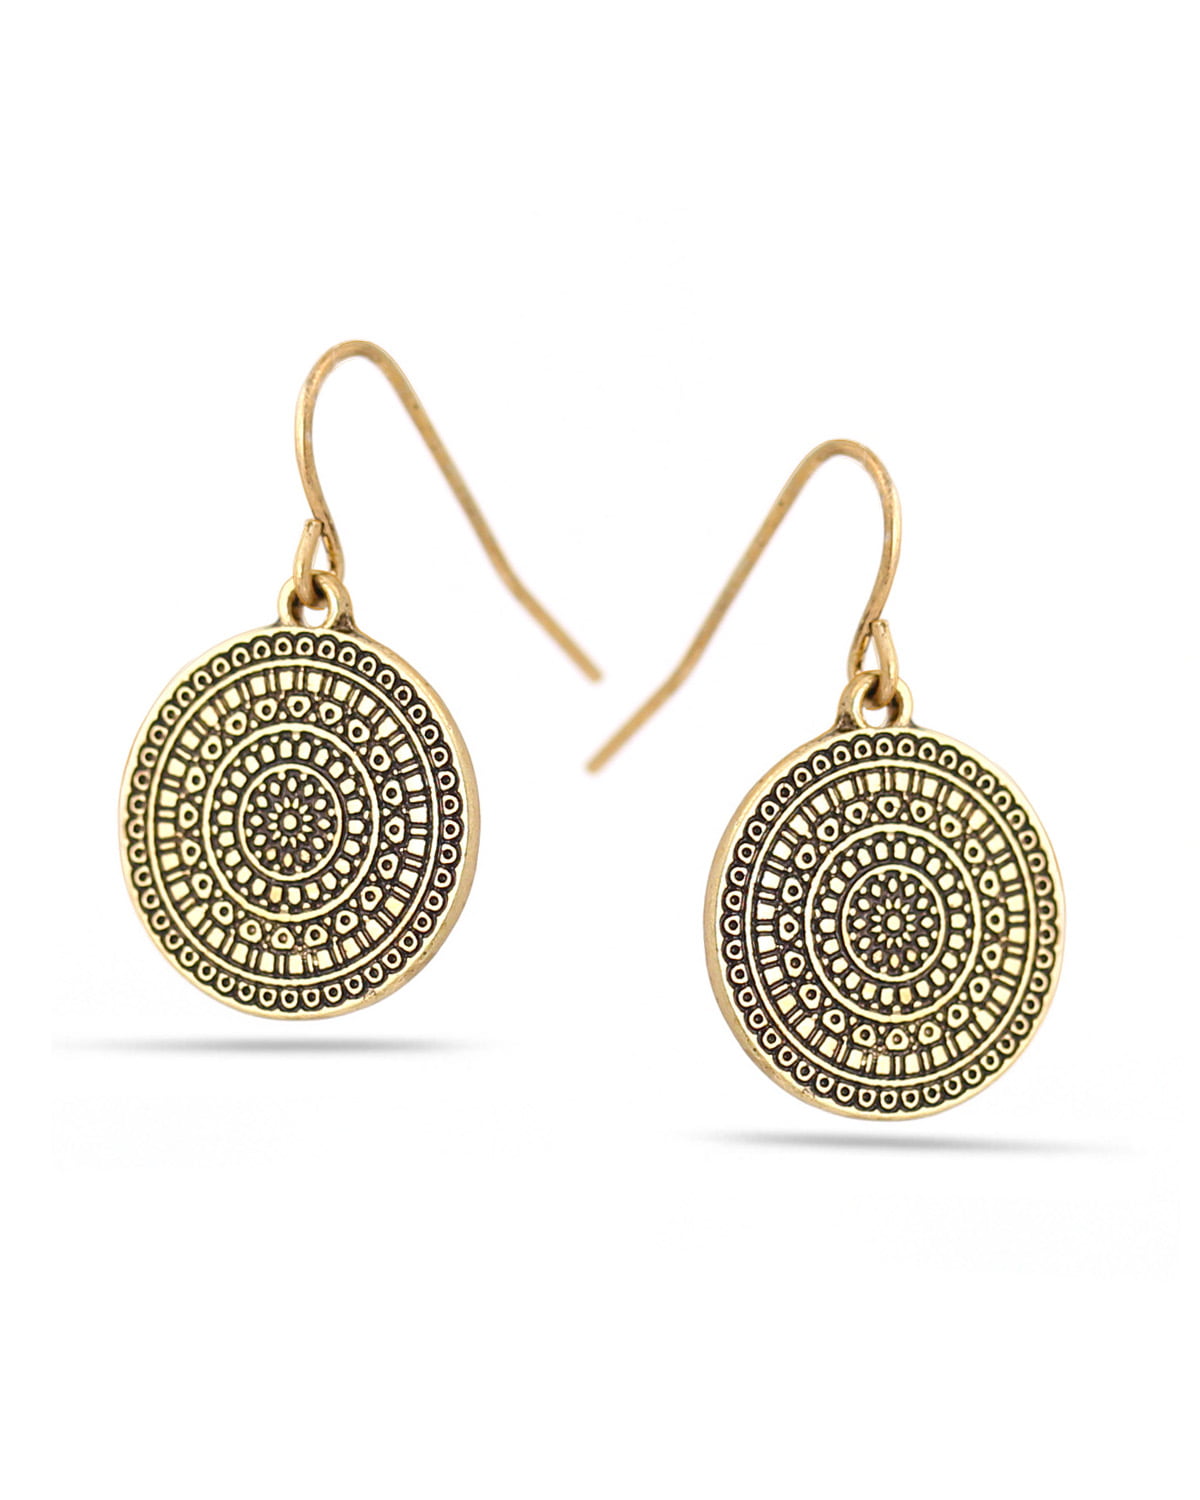 TAZZA WOMEN'S OXIDIZED ANTIQUE LOOK VINTAGE BOHO STYLE GOLD ROUND DROP EARRINGS